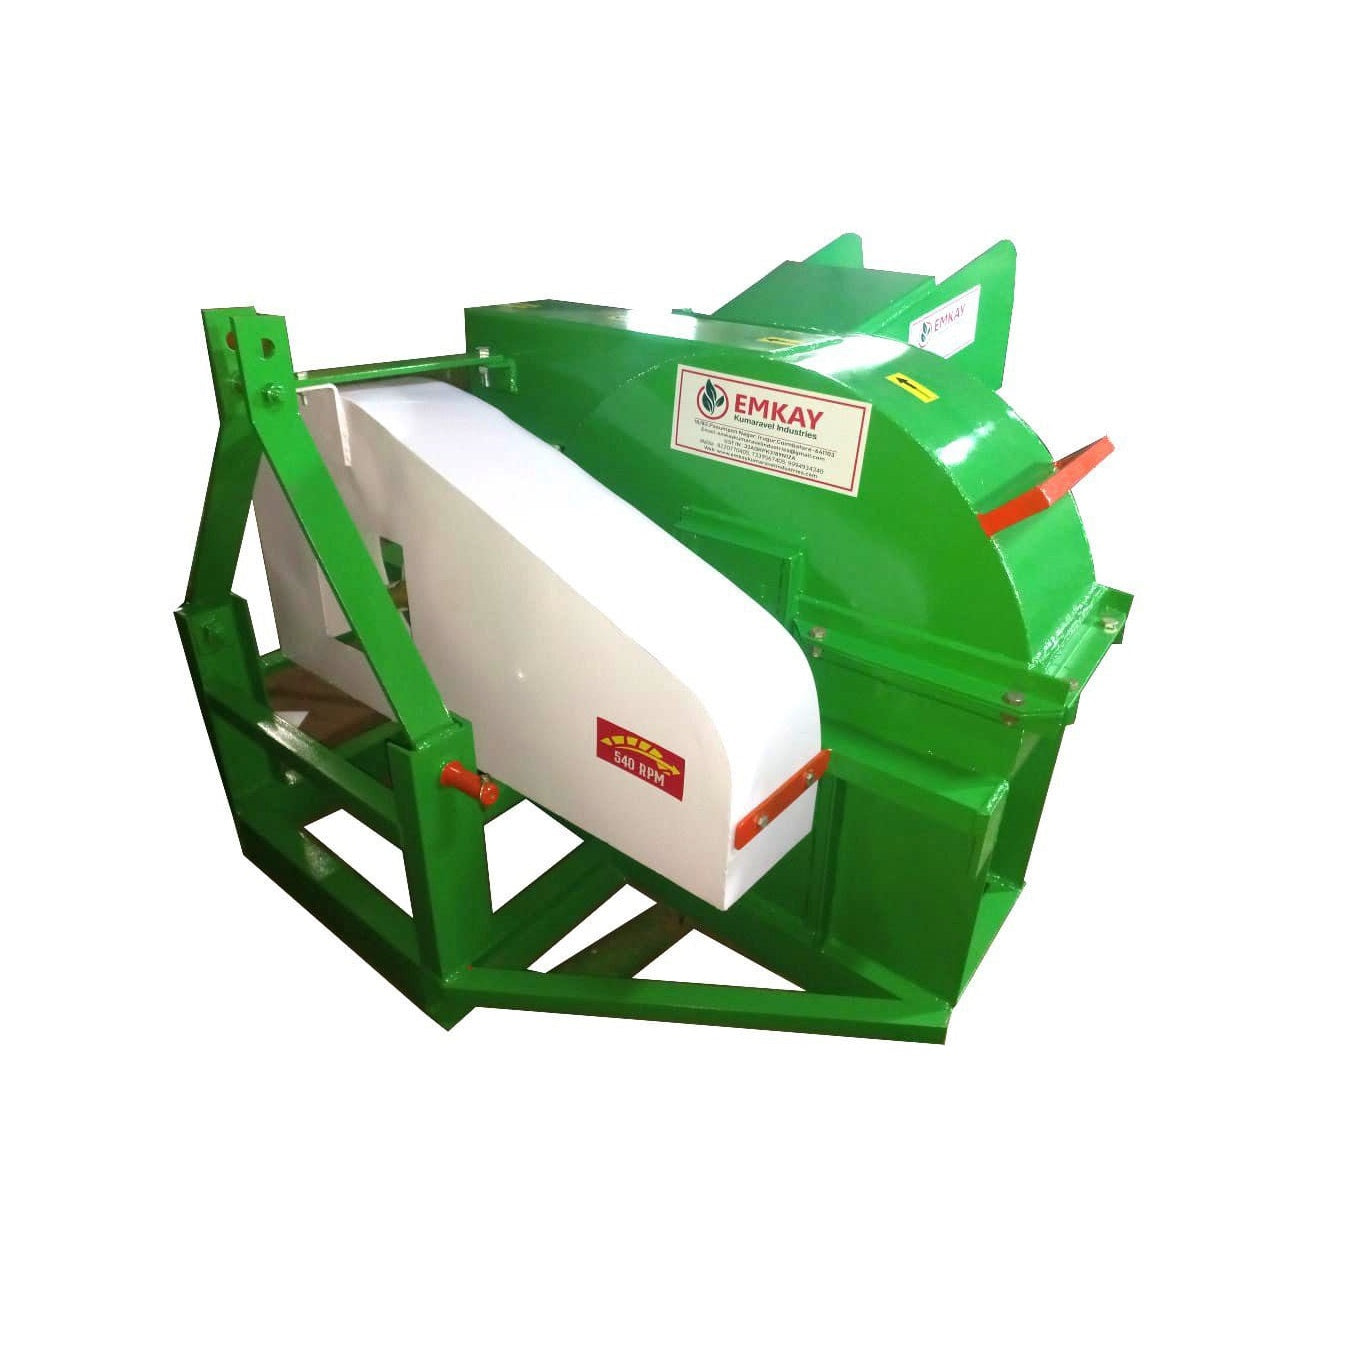 Emkay 55HP Shredder Tractor Opreated With Pulverizer